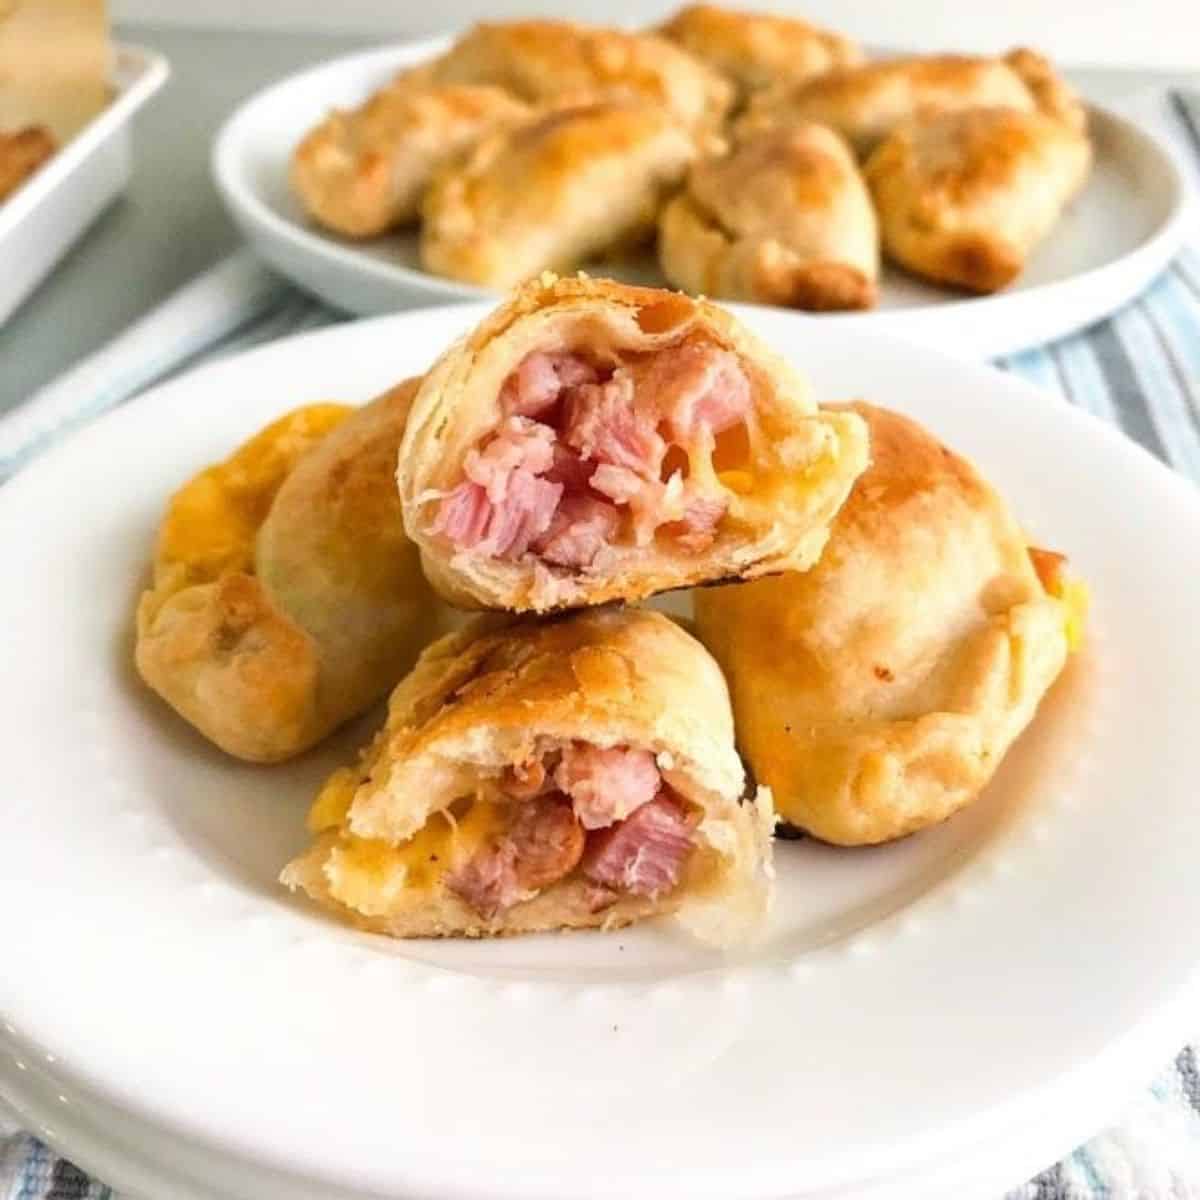 Ham and cheese pastries, I hope they are as good as they look and